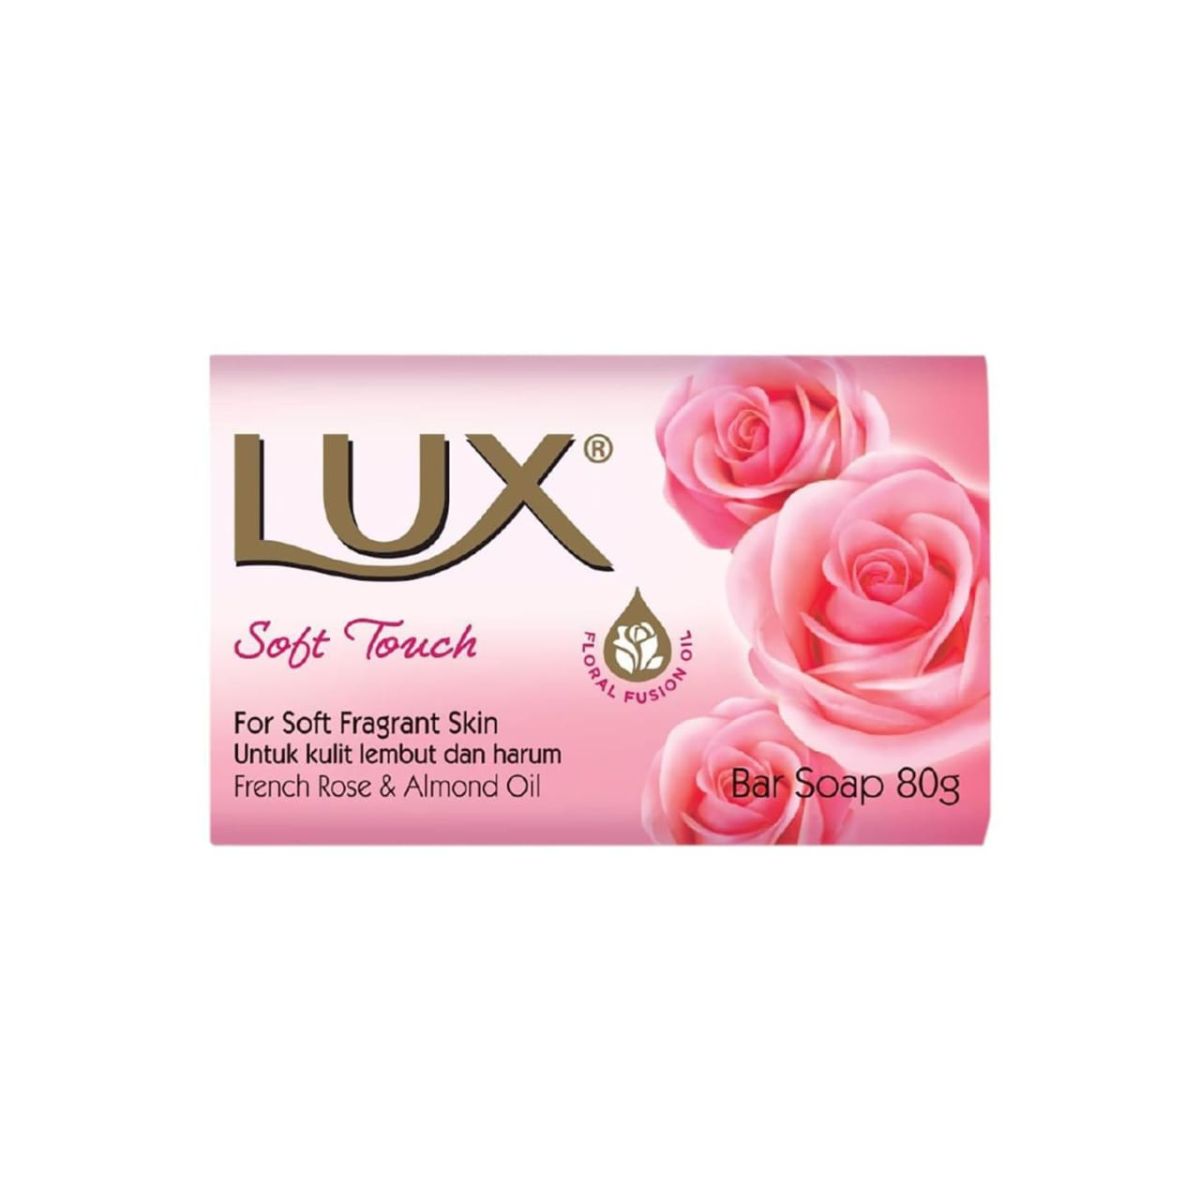 Lux Soft Touch - Bar Soap - 80g